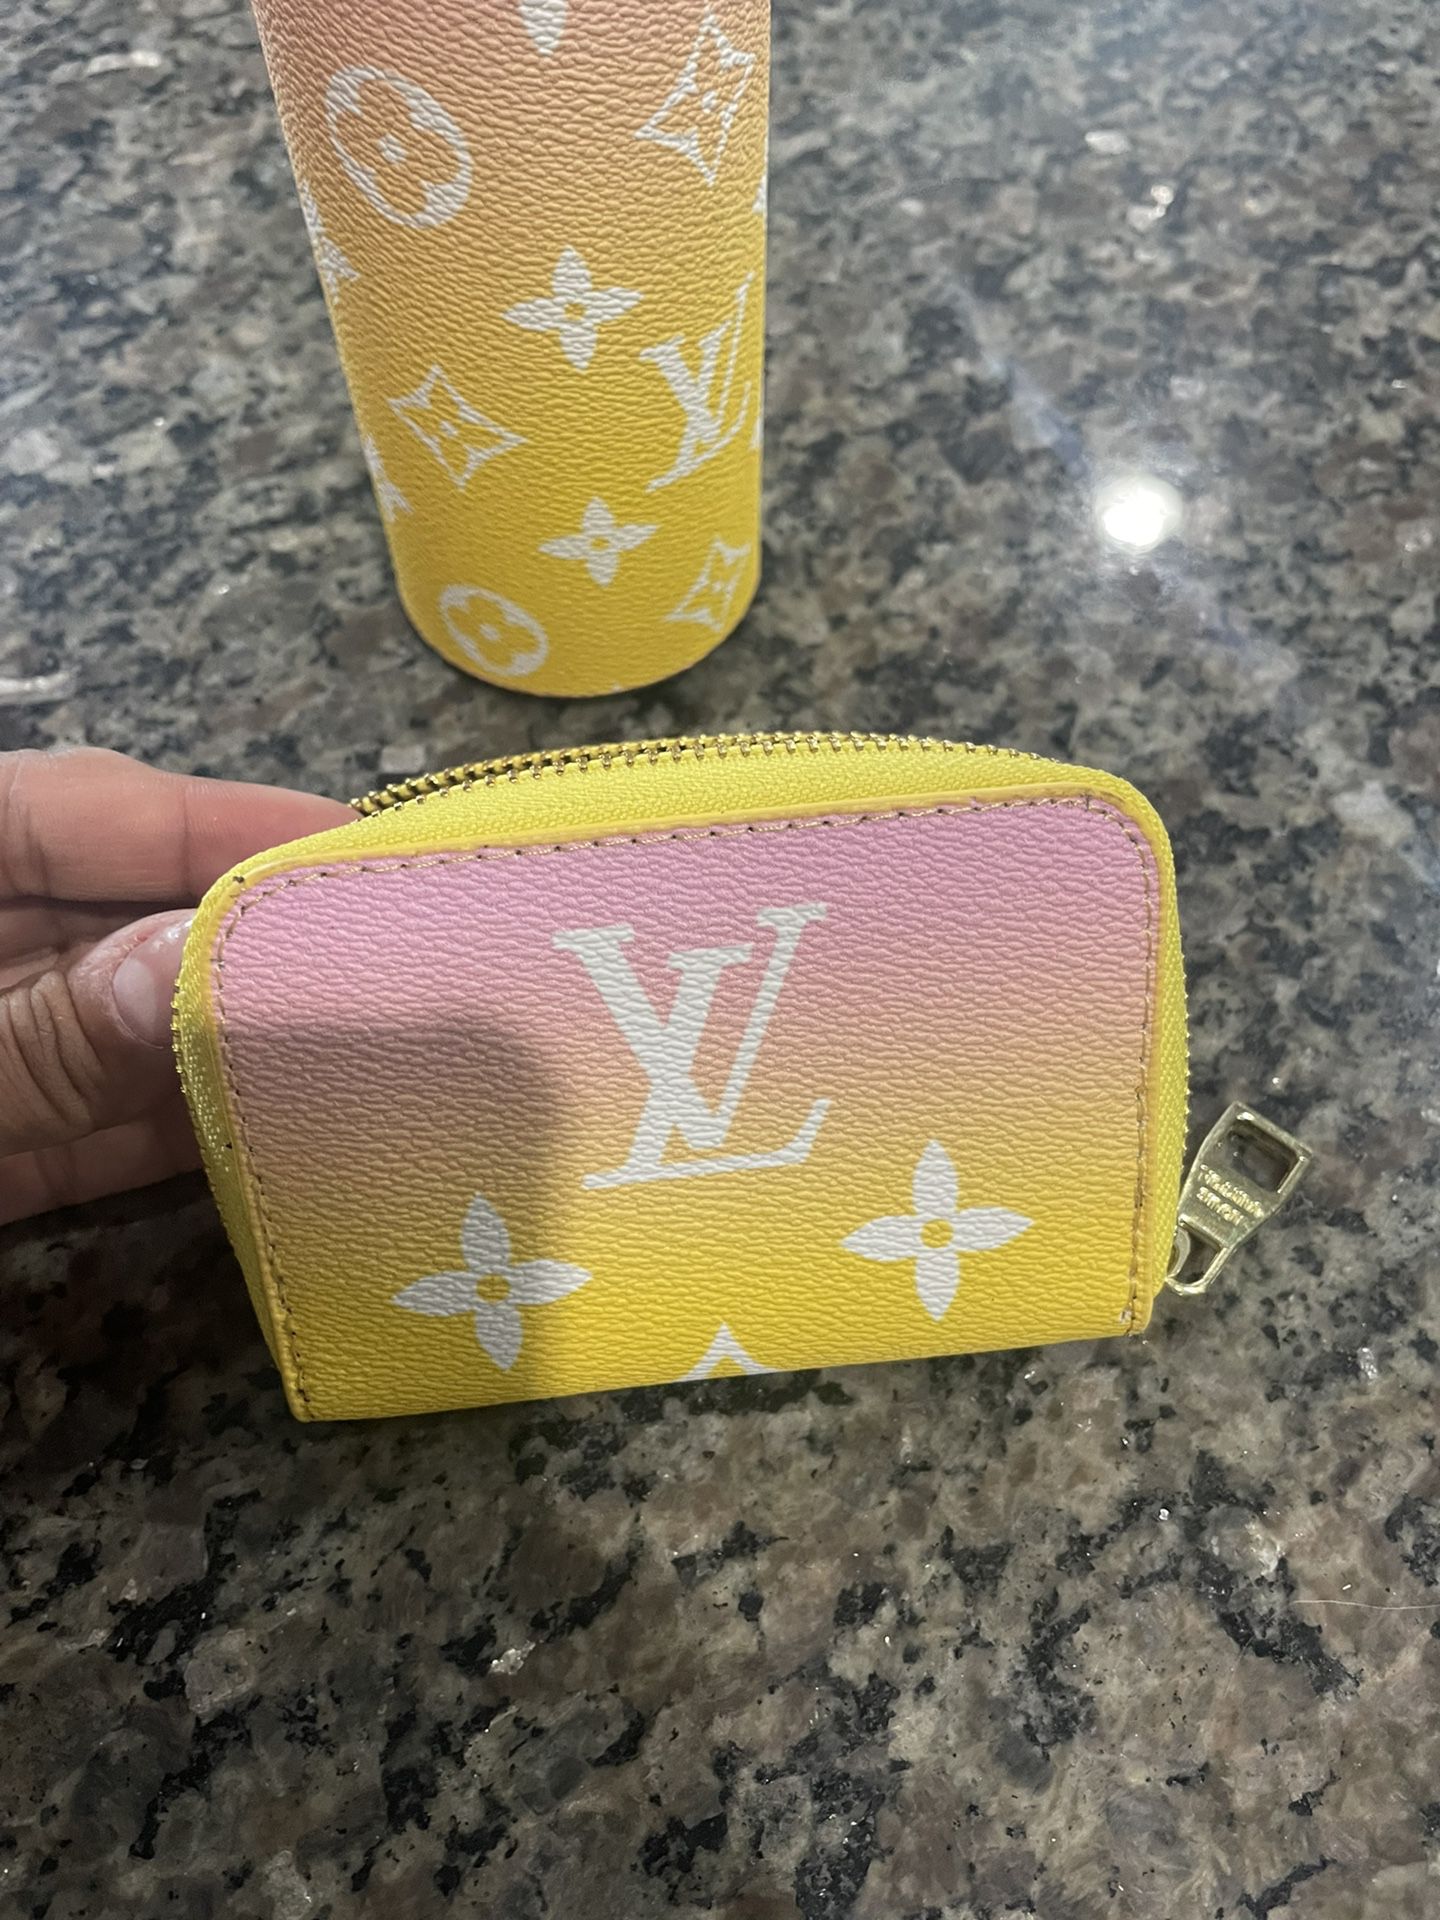 NEW ! LOUIS VUITTON PERFUME SAMPLES 3 BOXES for Sale in Lakeside, CA -  OfferUp